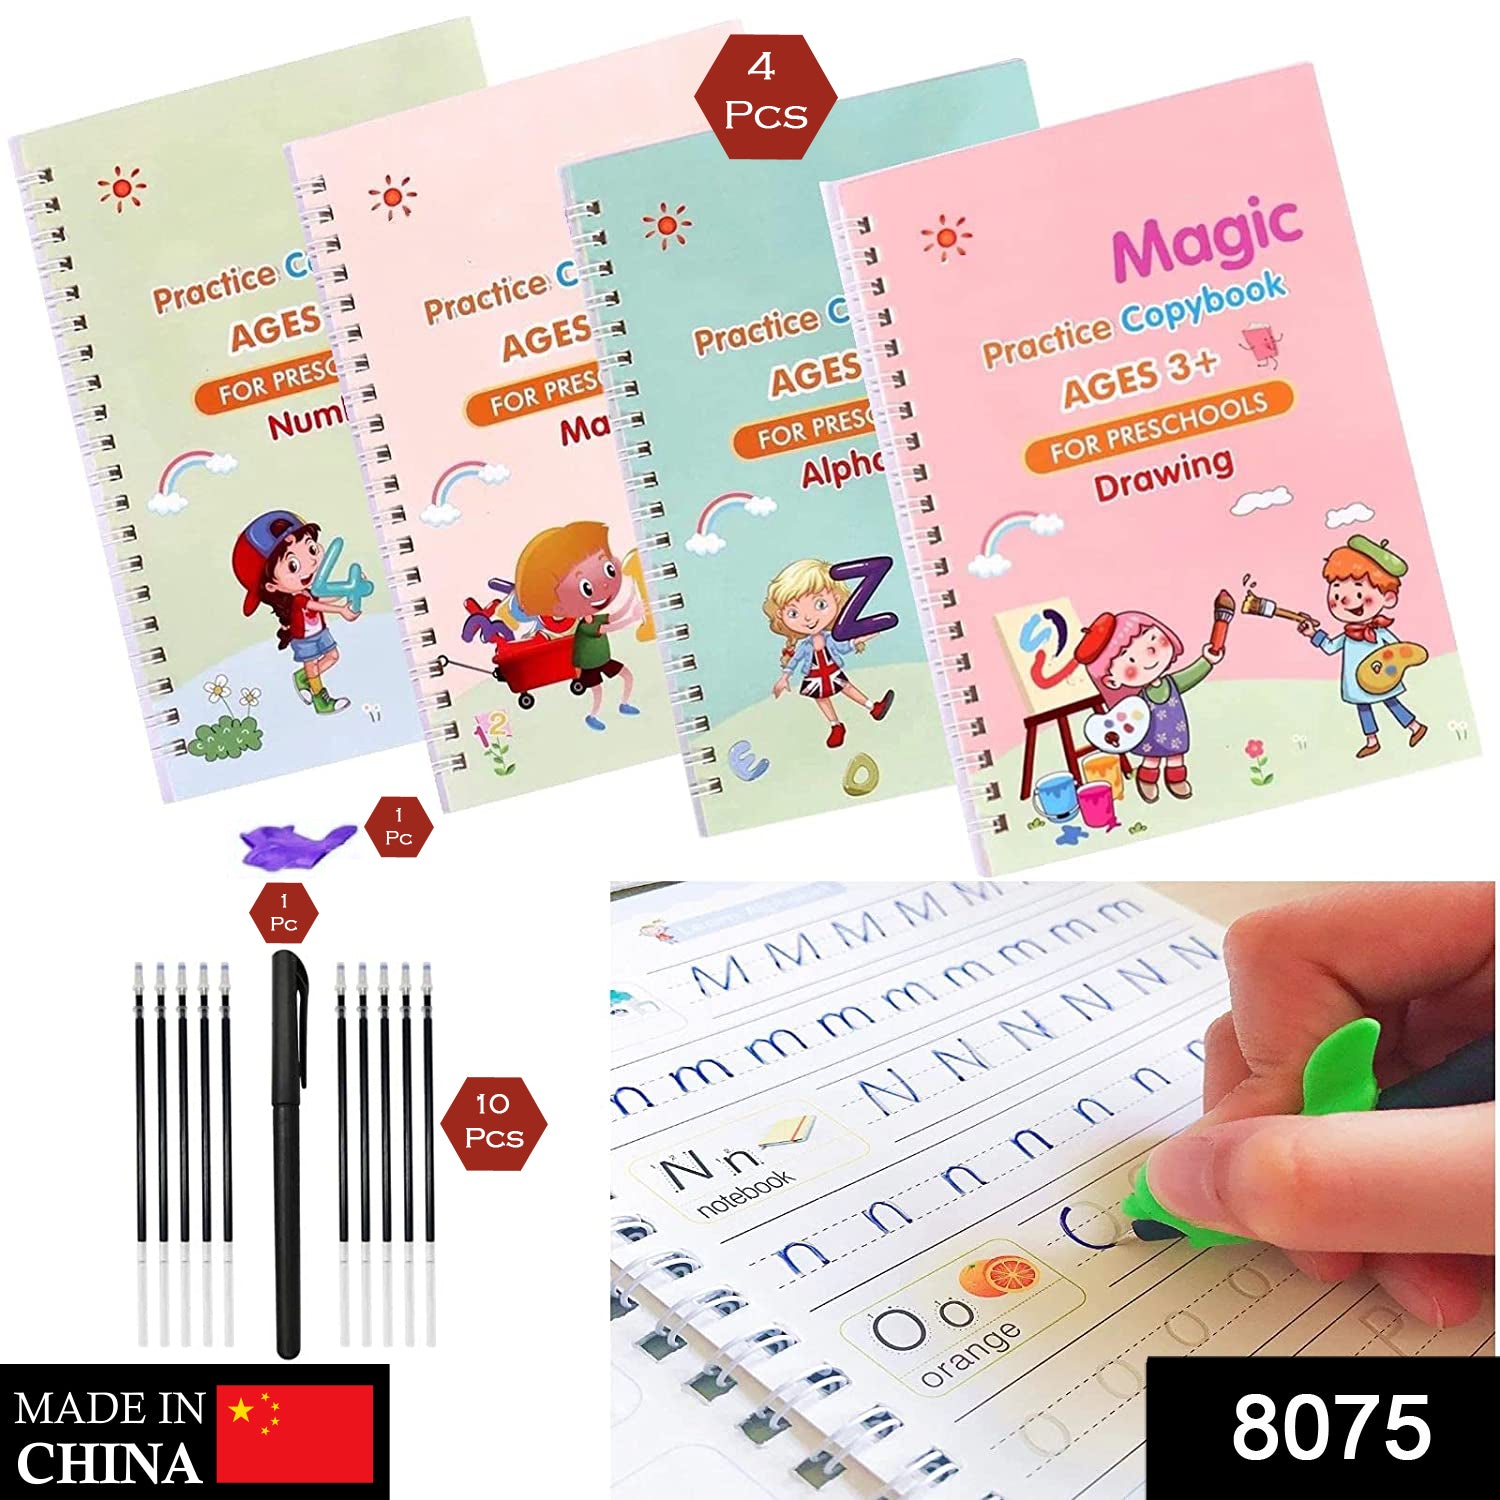 8075 4 Pc Magic Copybook widely used by kids, children’s and even adults also to write down important things over it while emergencies etc. DeoDap